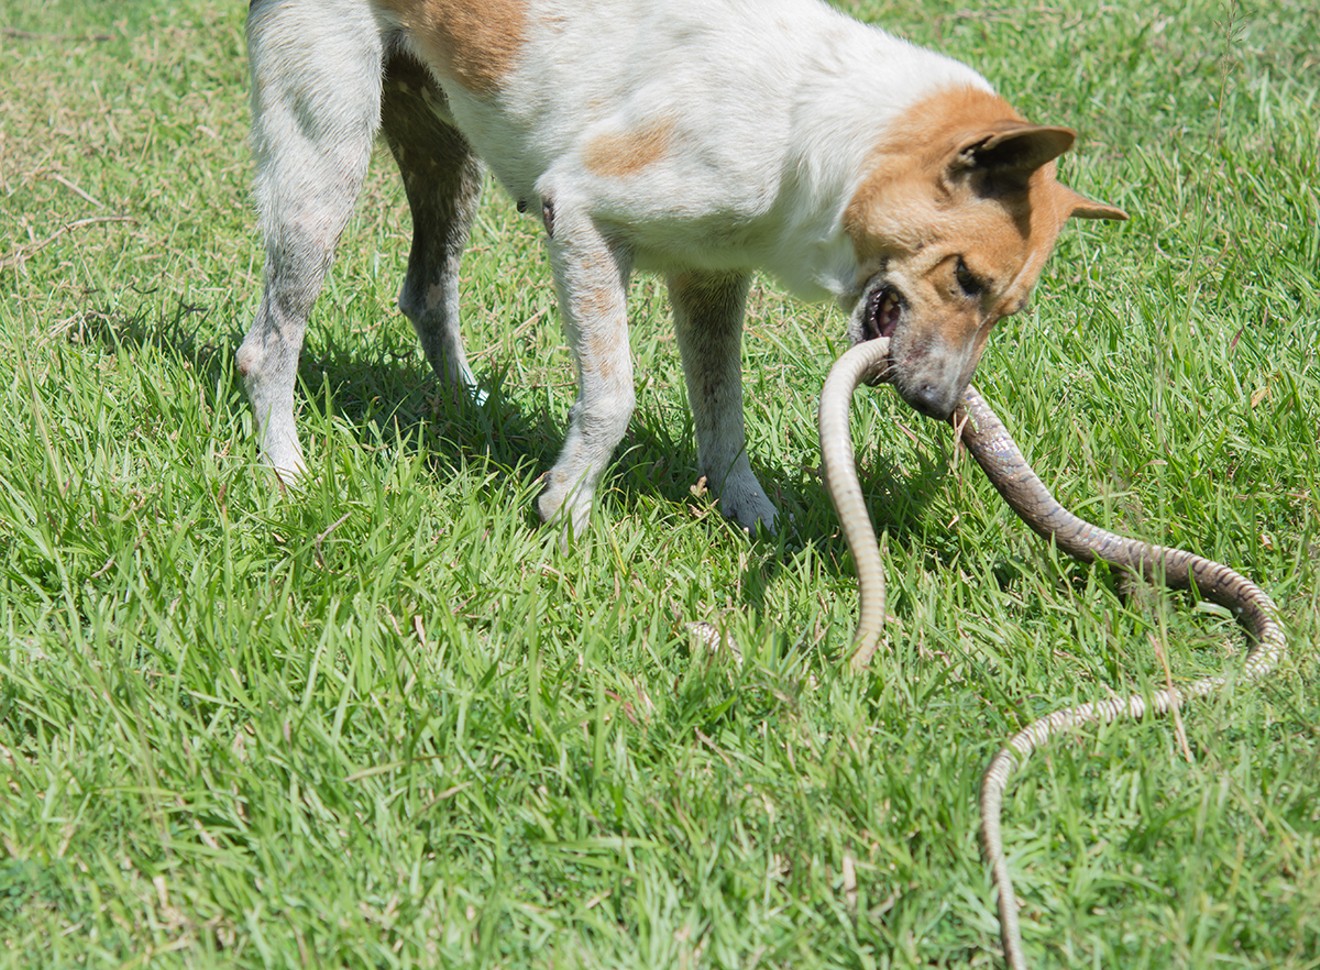 Seeing something like this is enough to panic any hunter or pet lover. Learn how to protect your dog during the 39th Annual All Breed Desnaking Program, August 4-5, 2018.